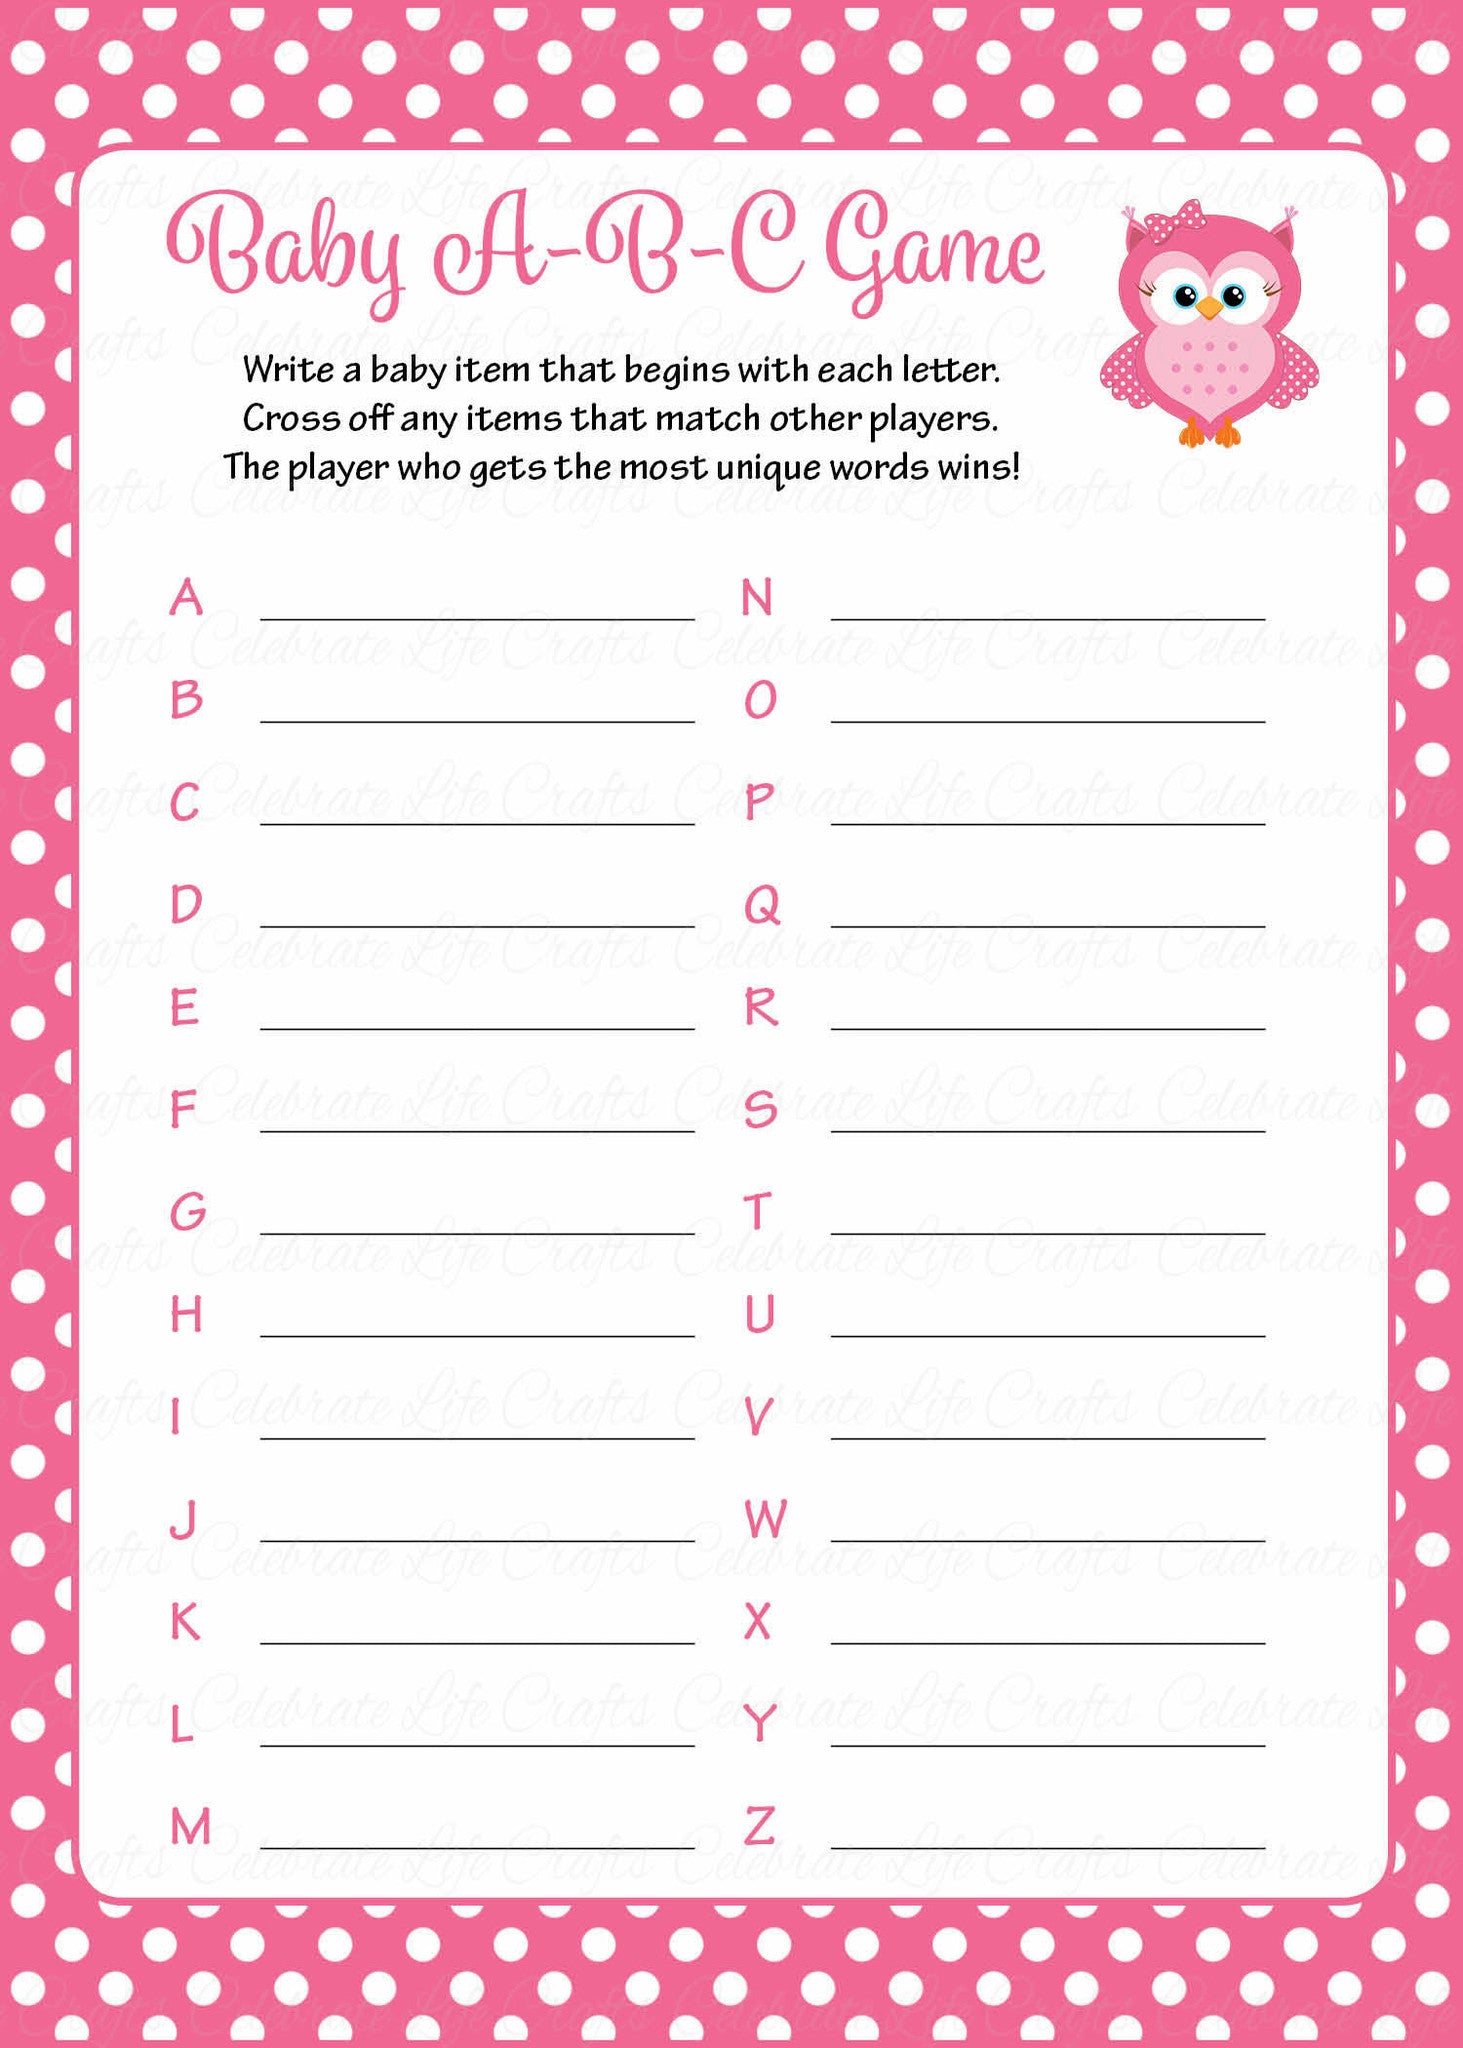 baby-abc-s-baby-shower-game-owl-baby-shower-theme-for-baby-girl